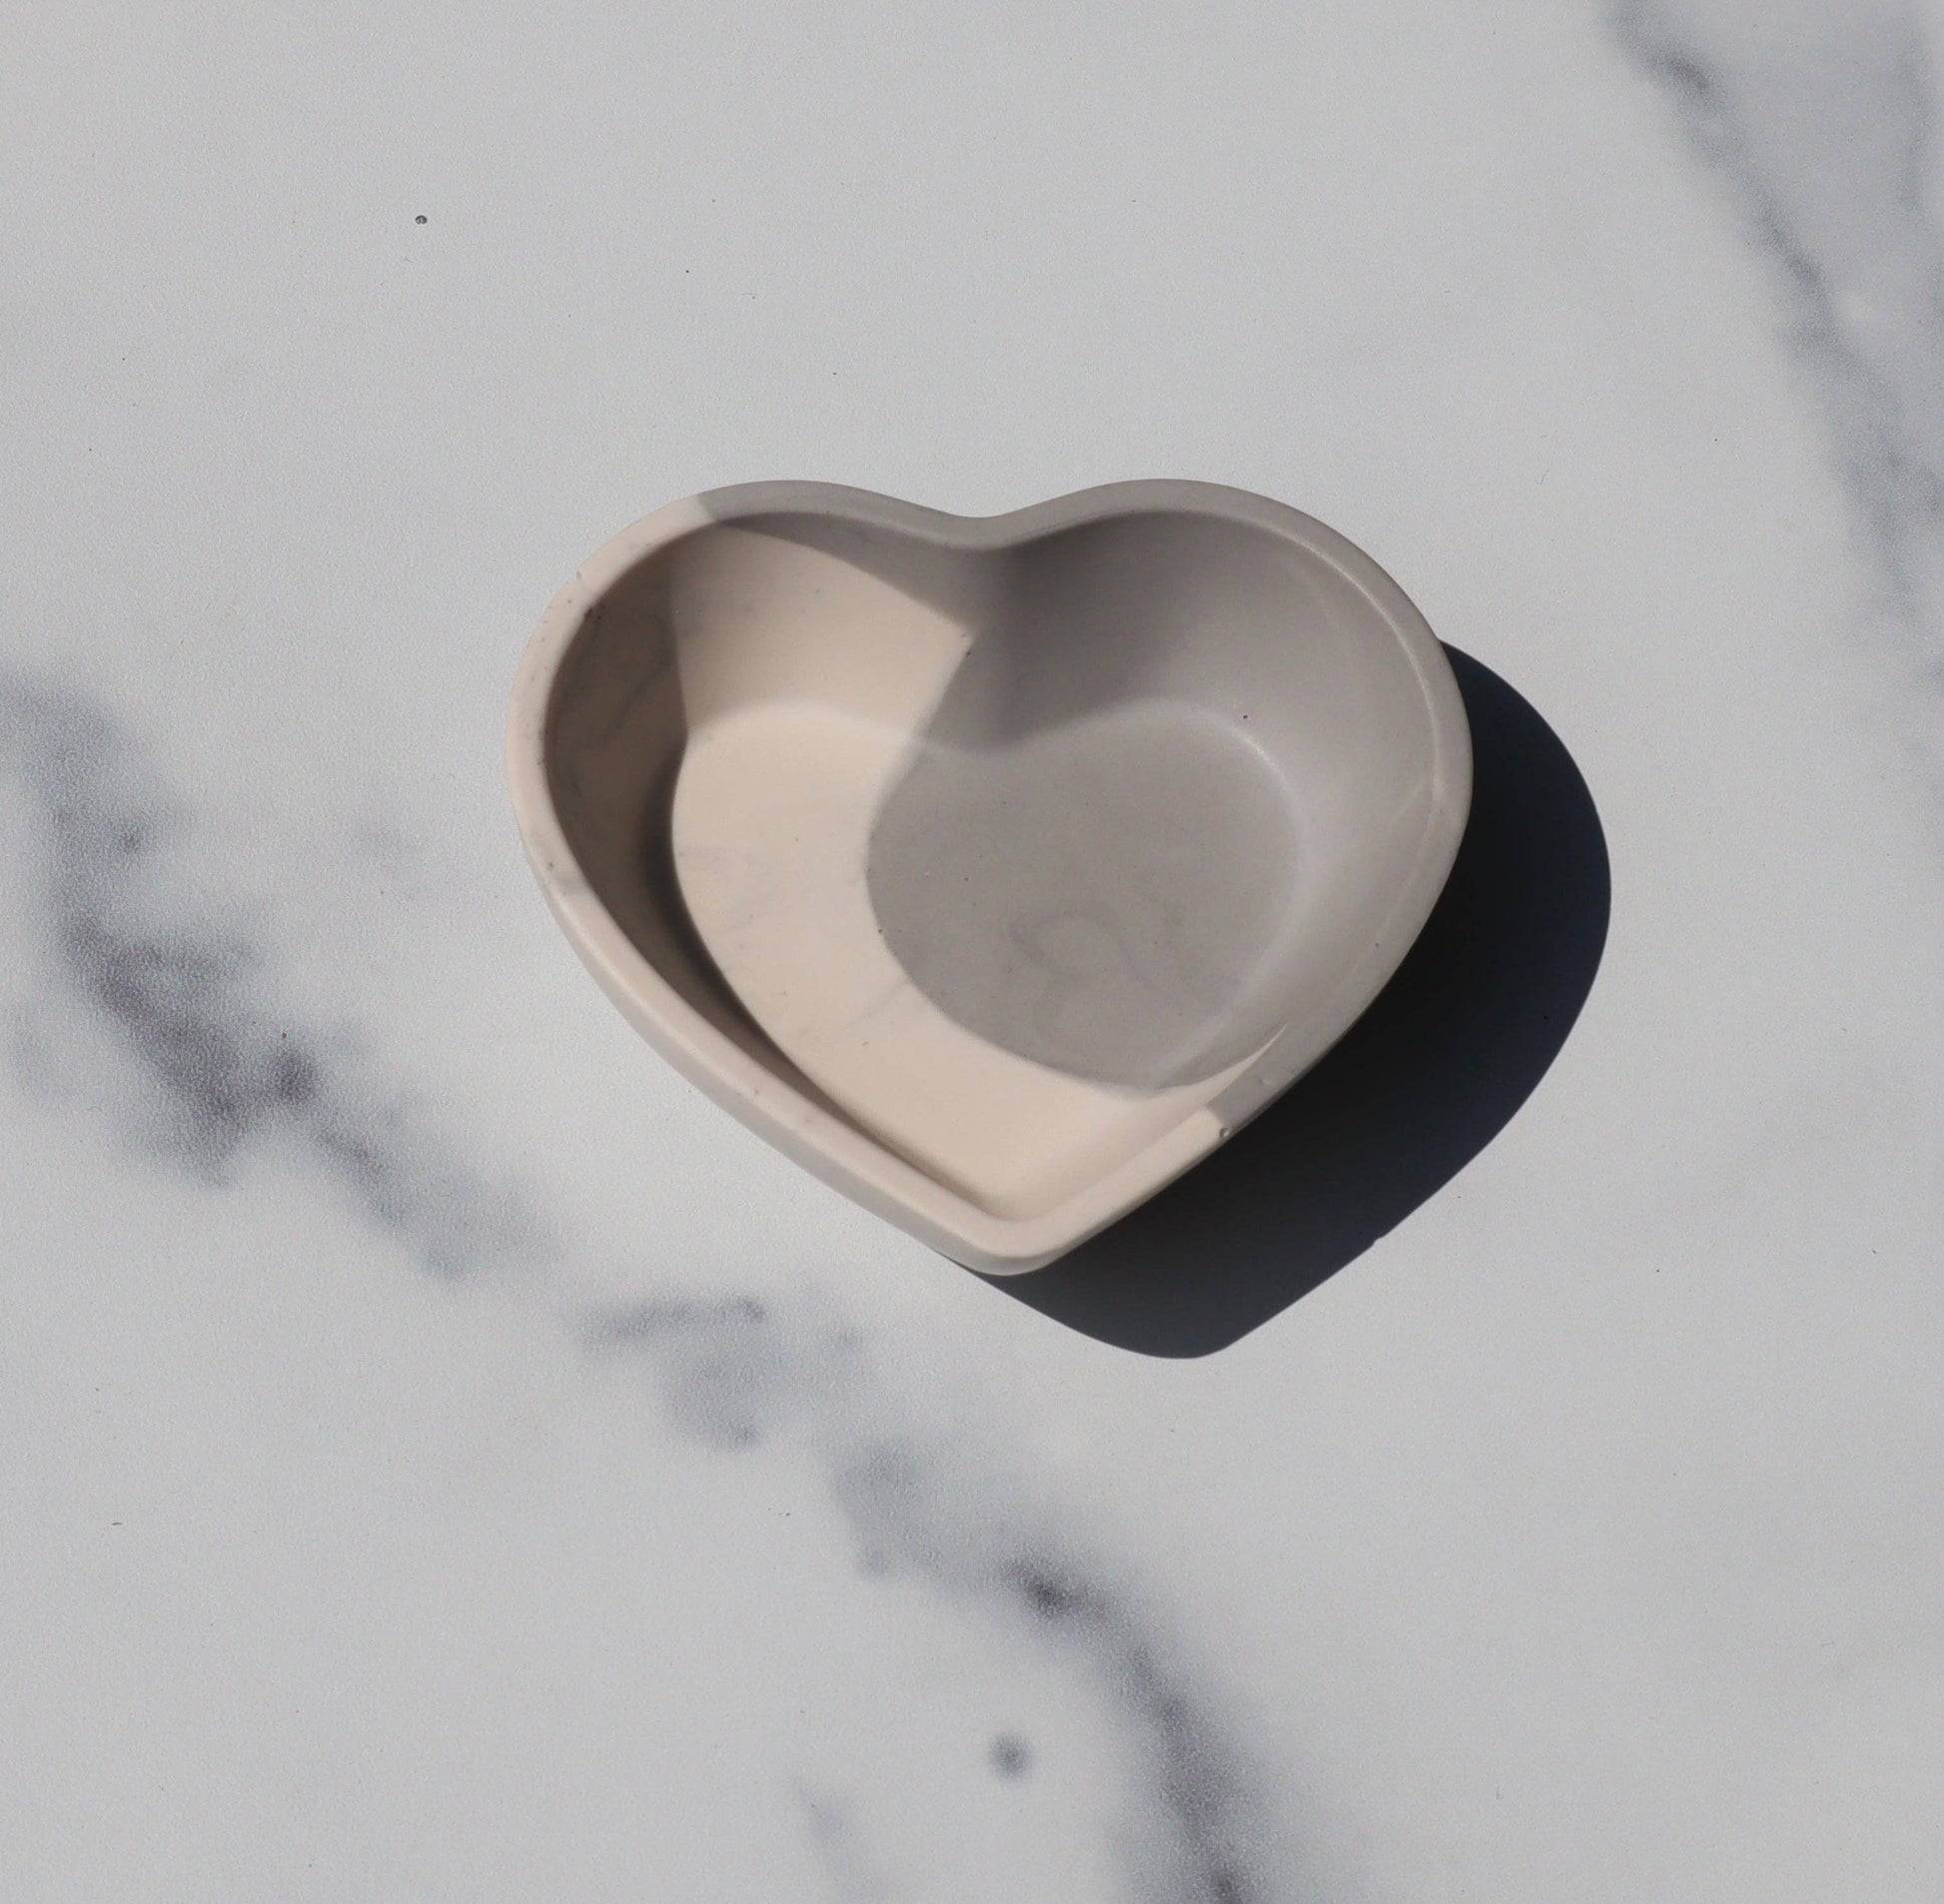 Small heart shaped dish on a marble counter